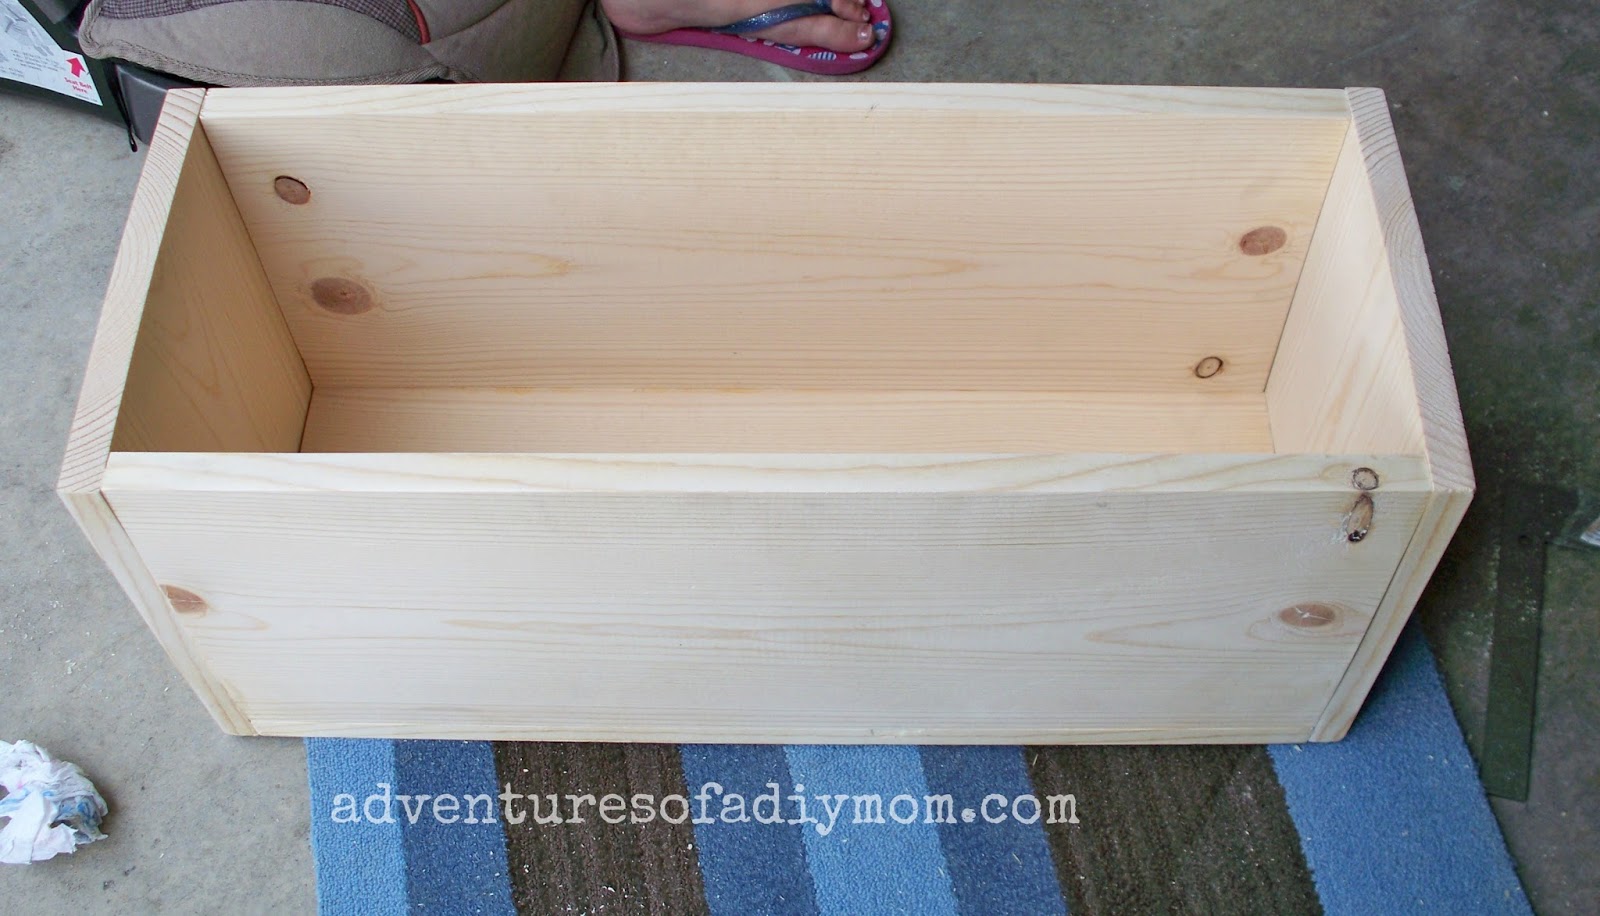 How to Build a Toy Box - Adventures of a DIY Mom